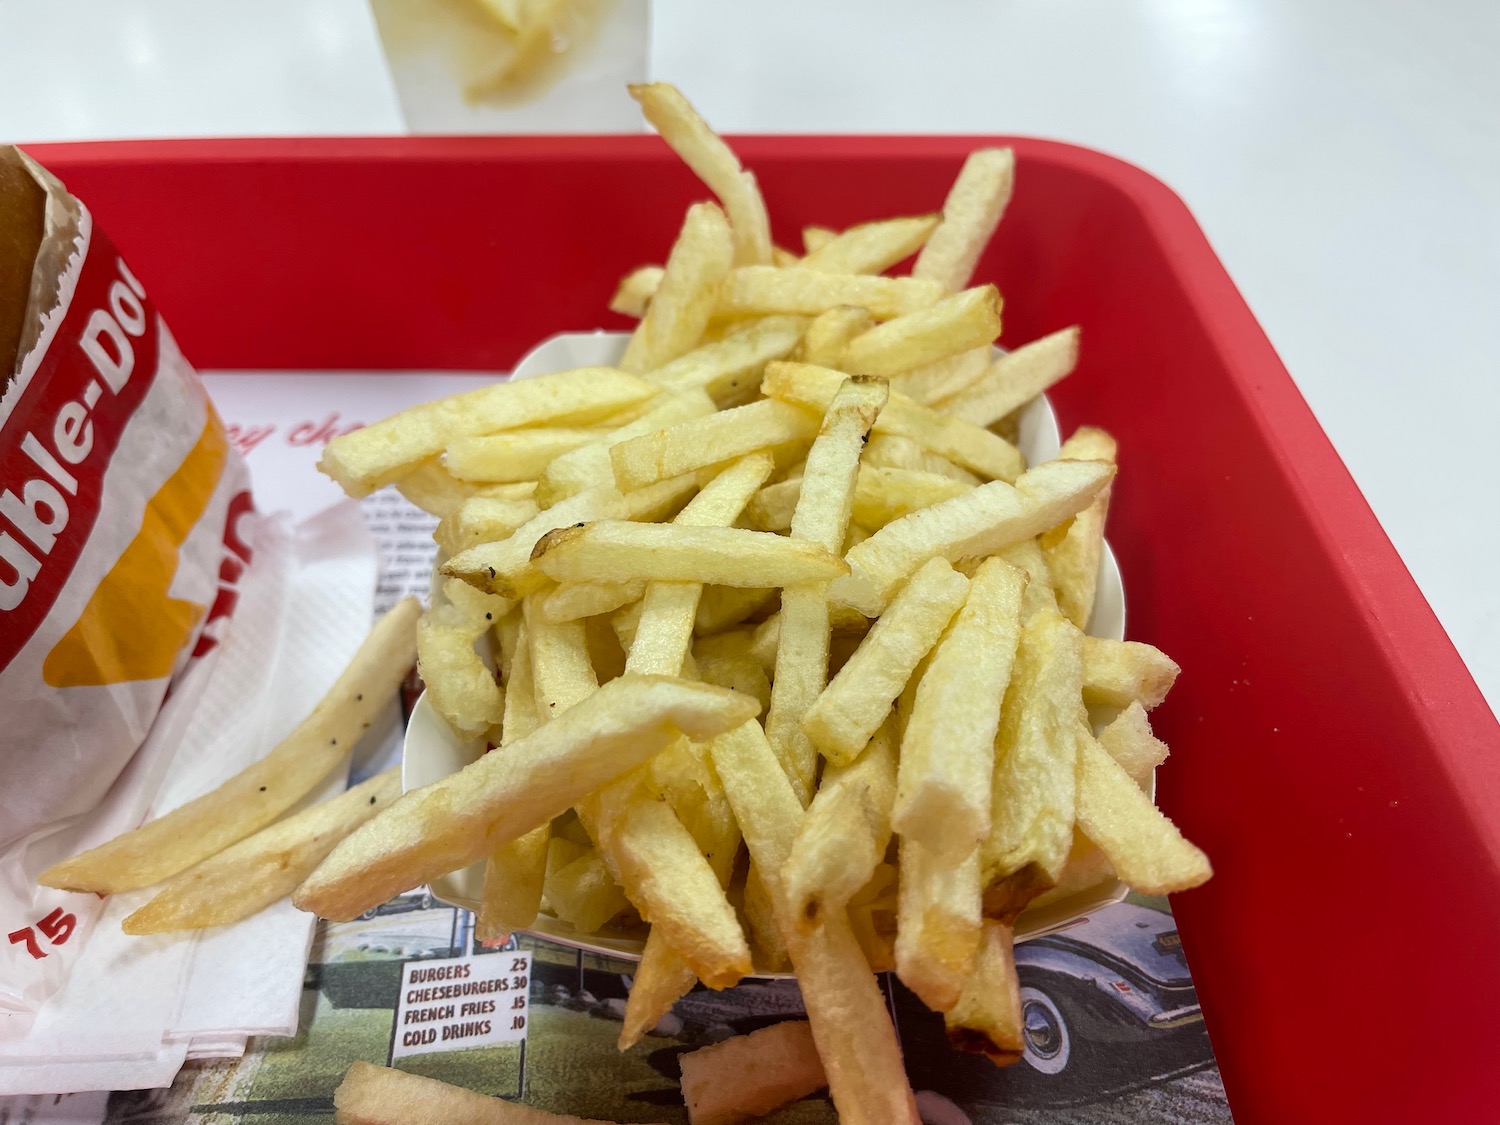 a red tray with french fries